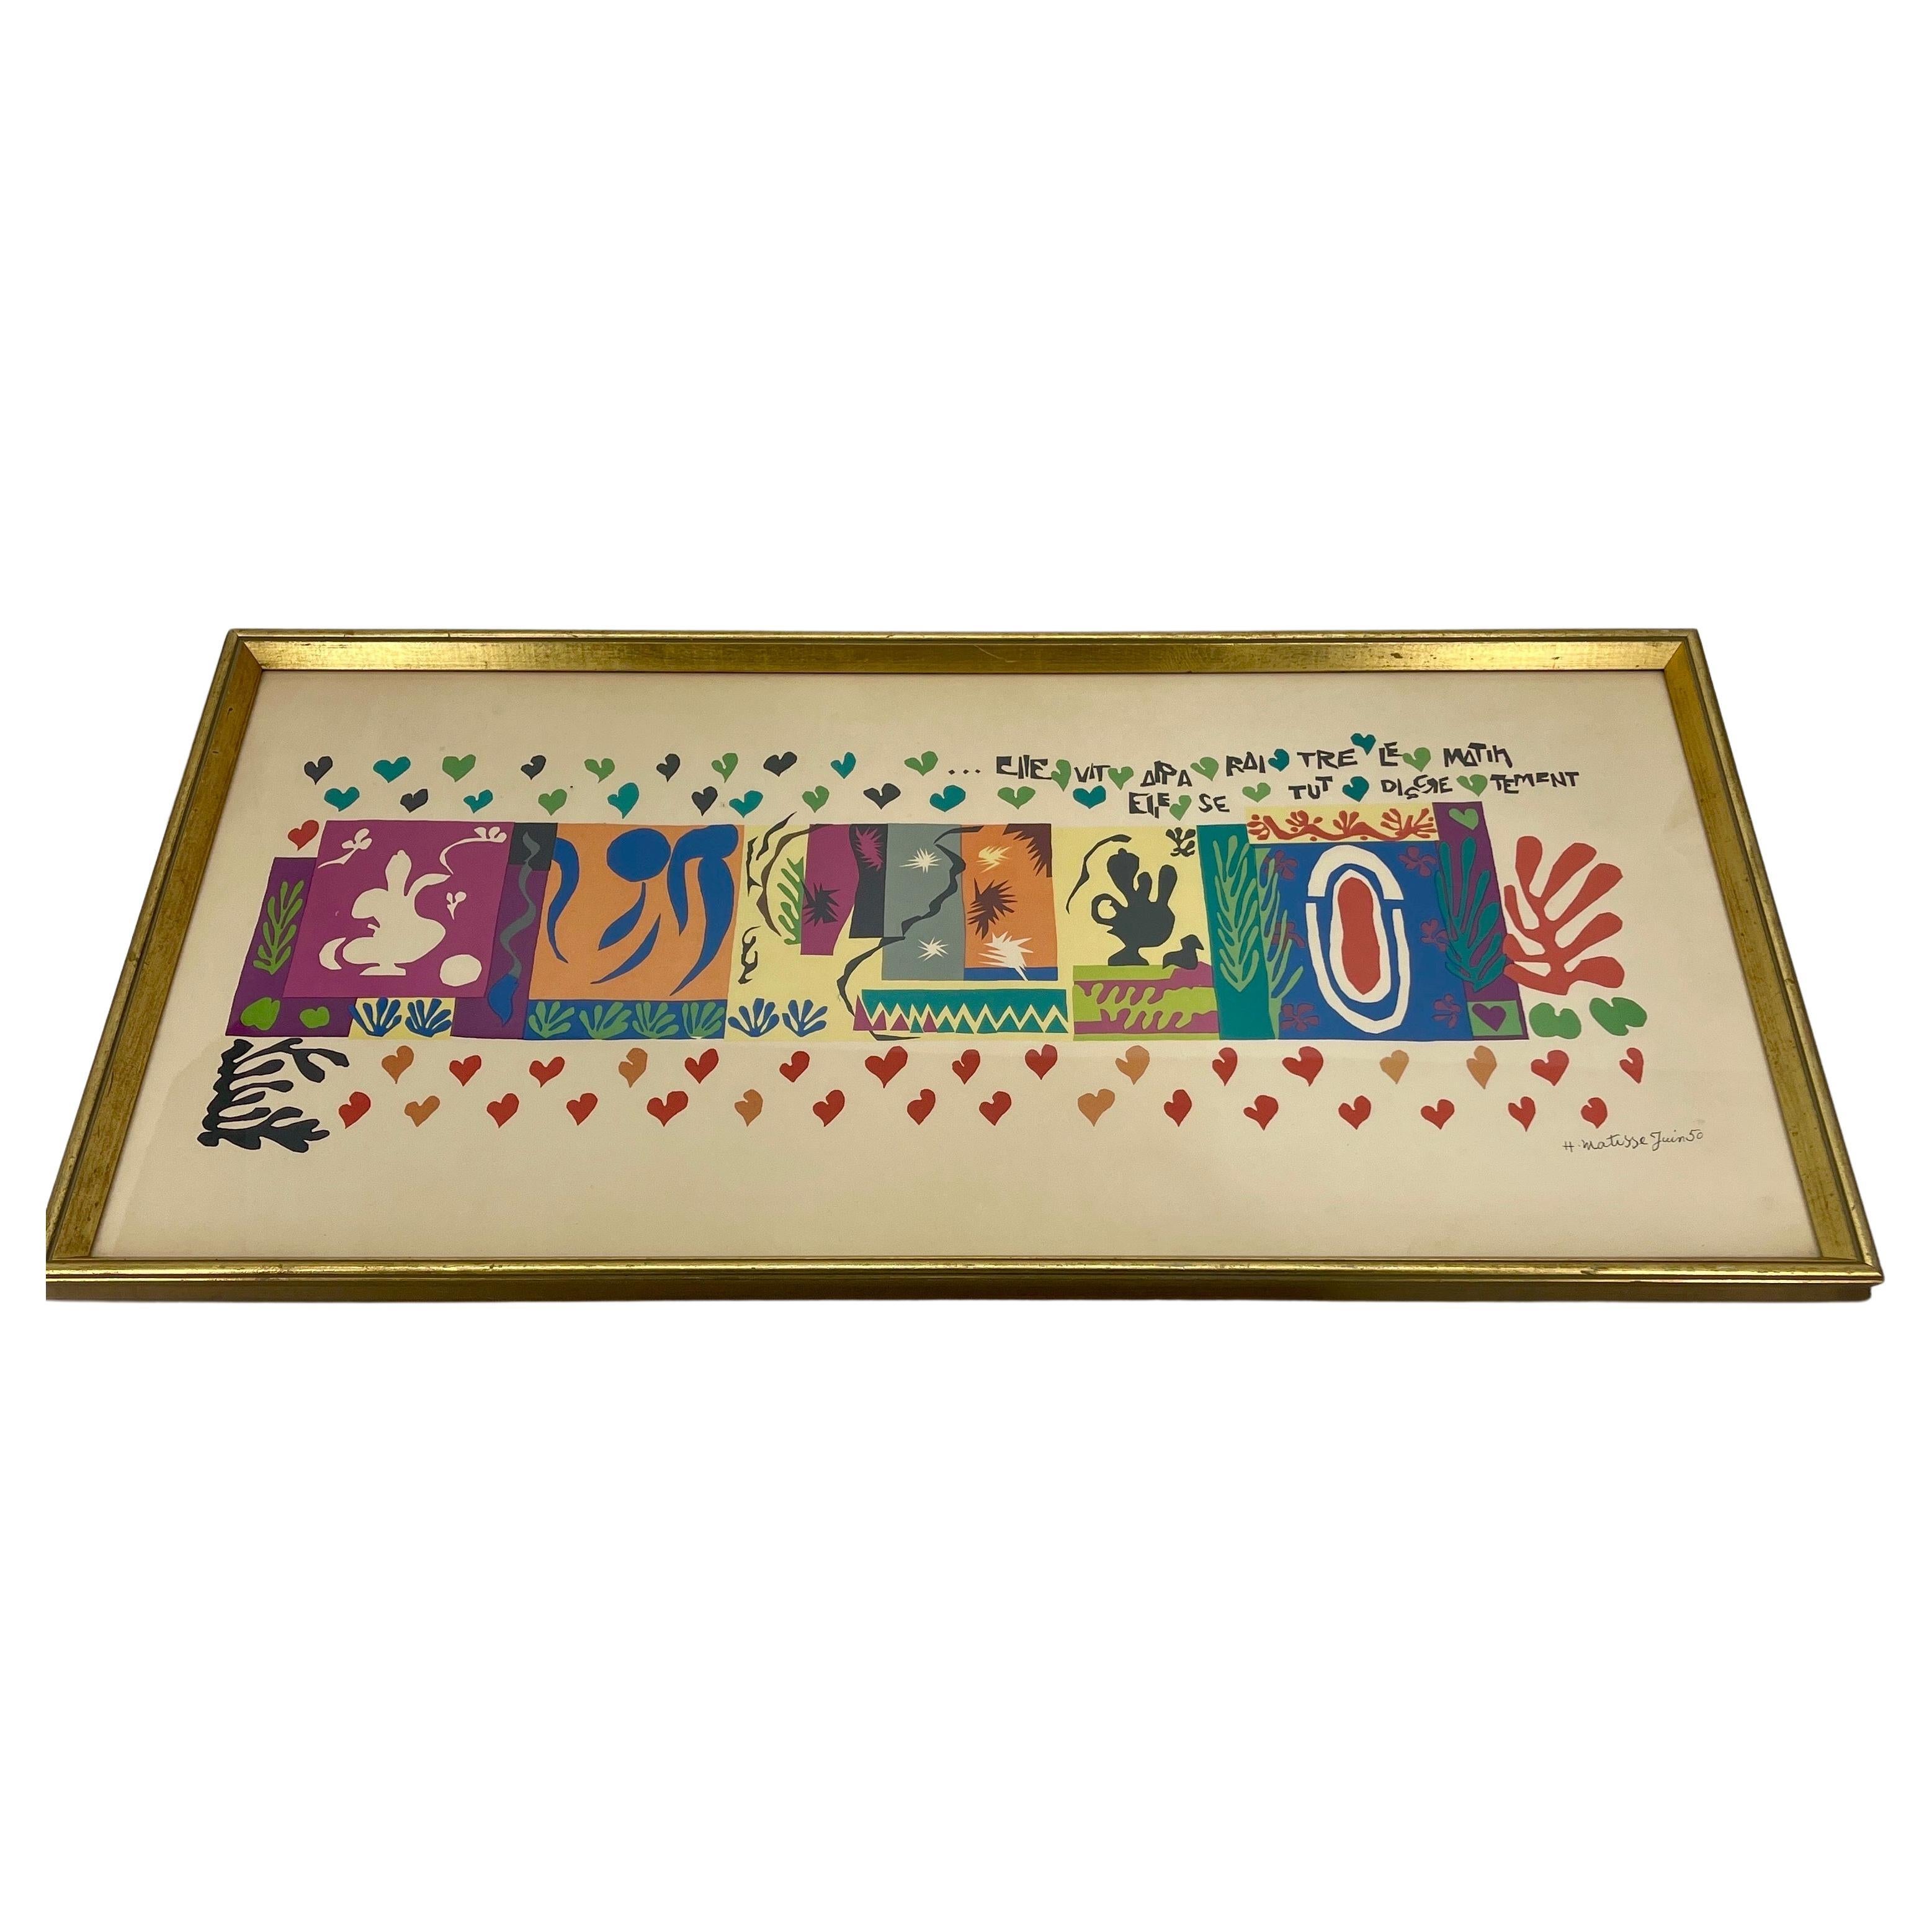 Signed Lithograph 1001 Nights by Henri Matisse, France

Beautiful lithograph by one of the most famous artists of the 20th century, Henri Matisse. The signed print entitled 